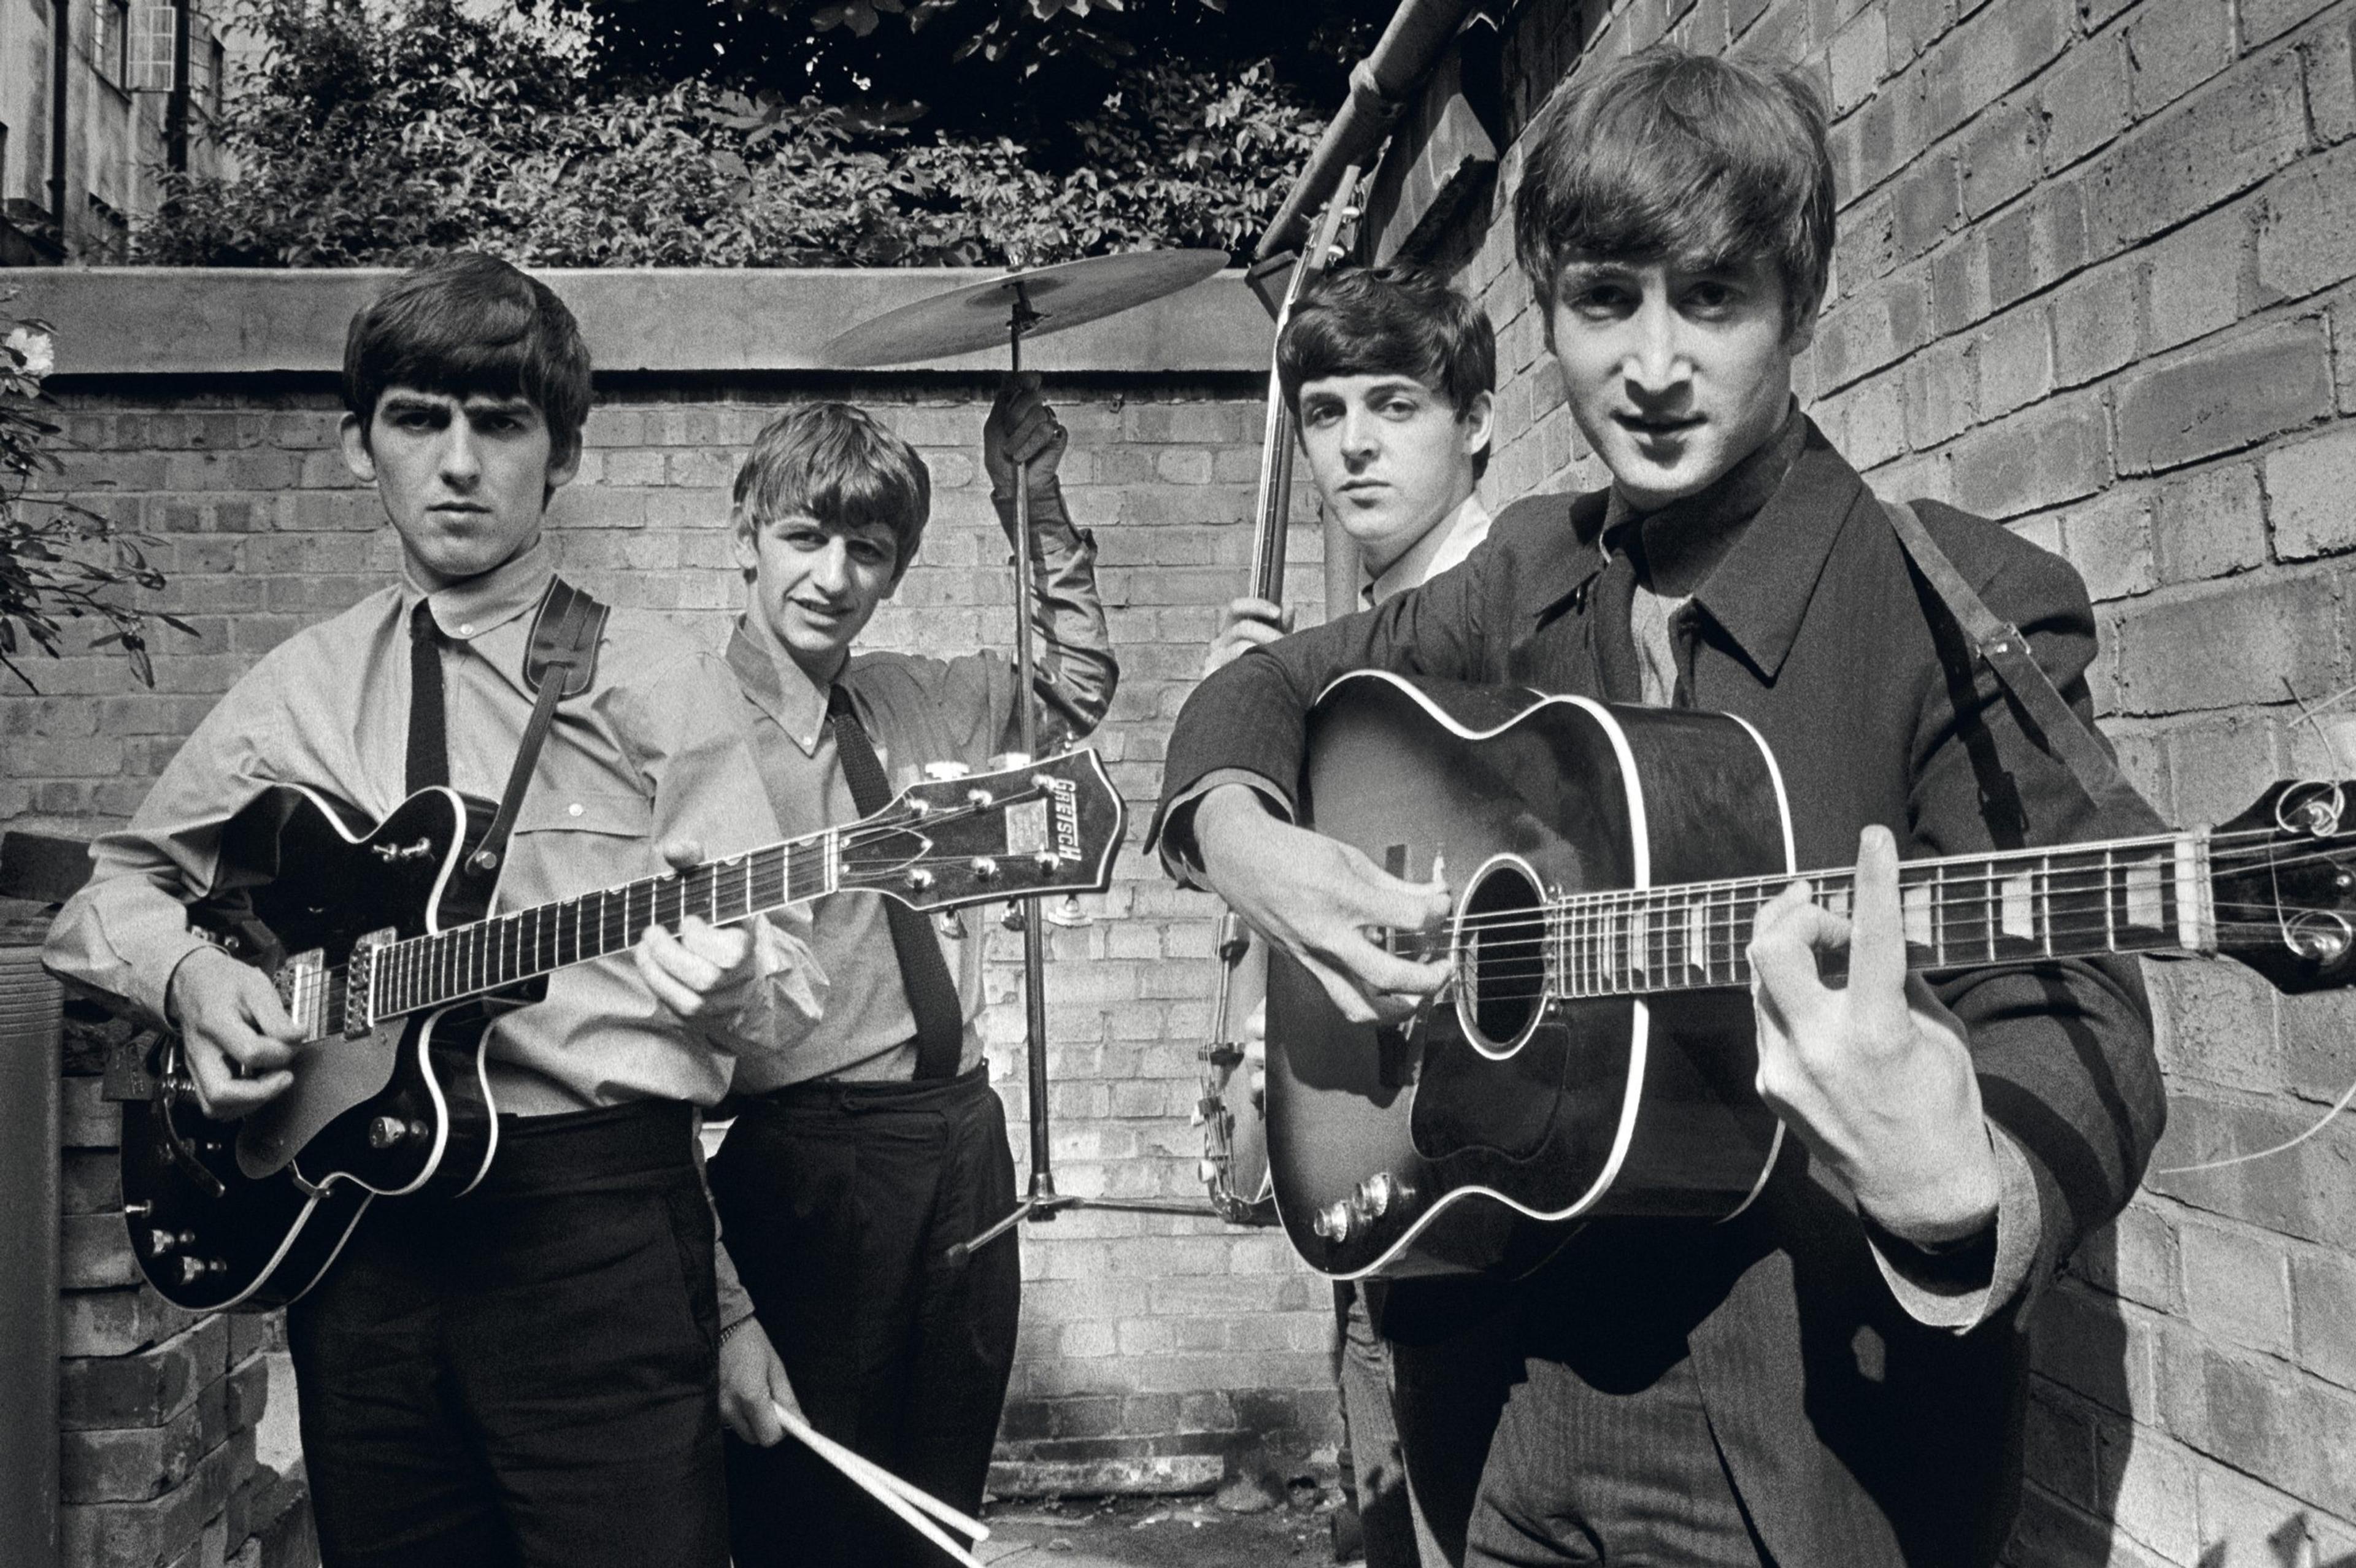 A black-and-white photograph of The Beatles holding their instruments against a brick wall